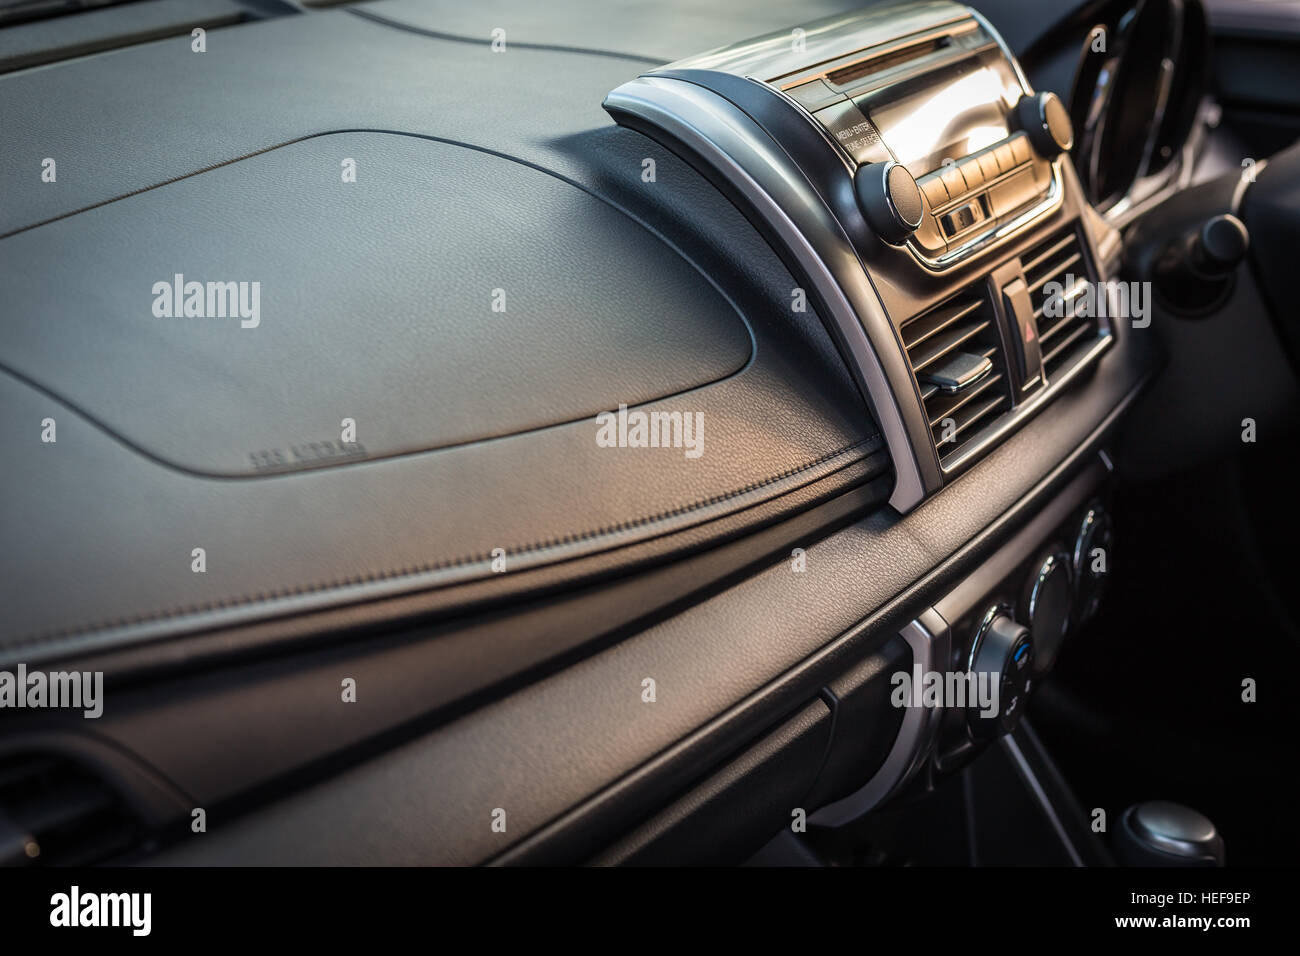 Detail of new modern car interior, Focus on stereo screen Stock Photo